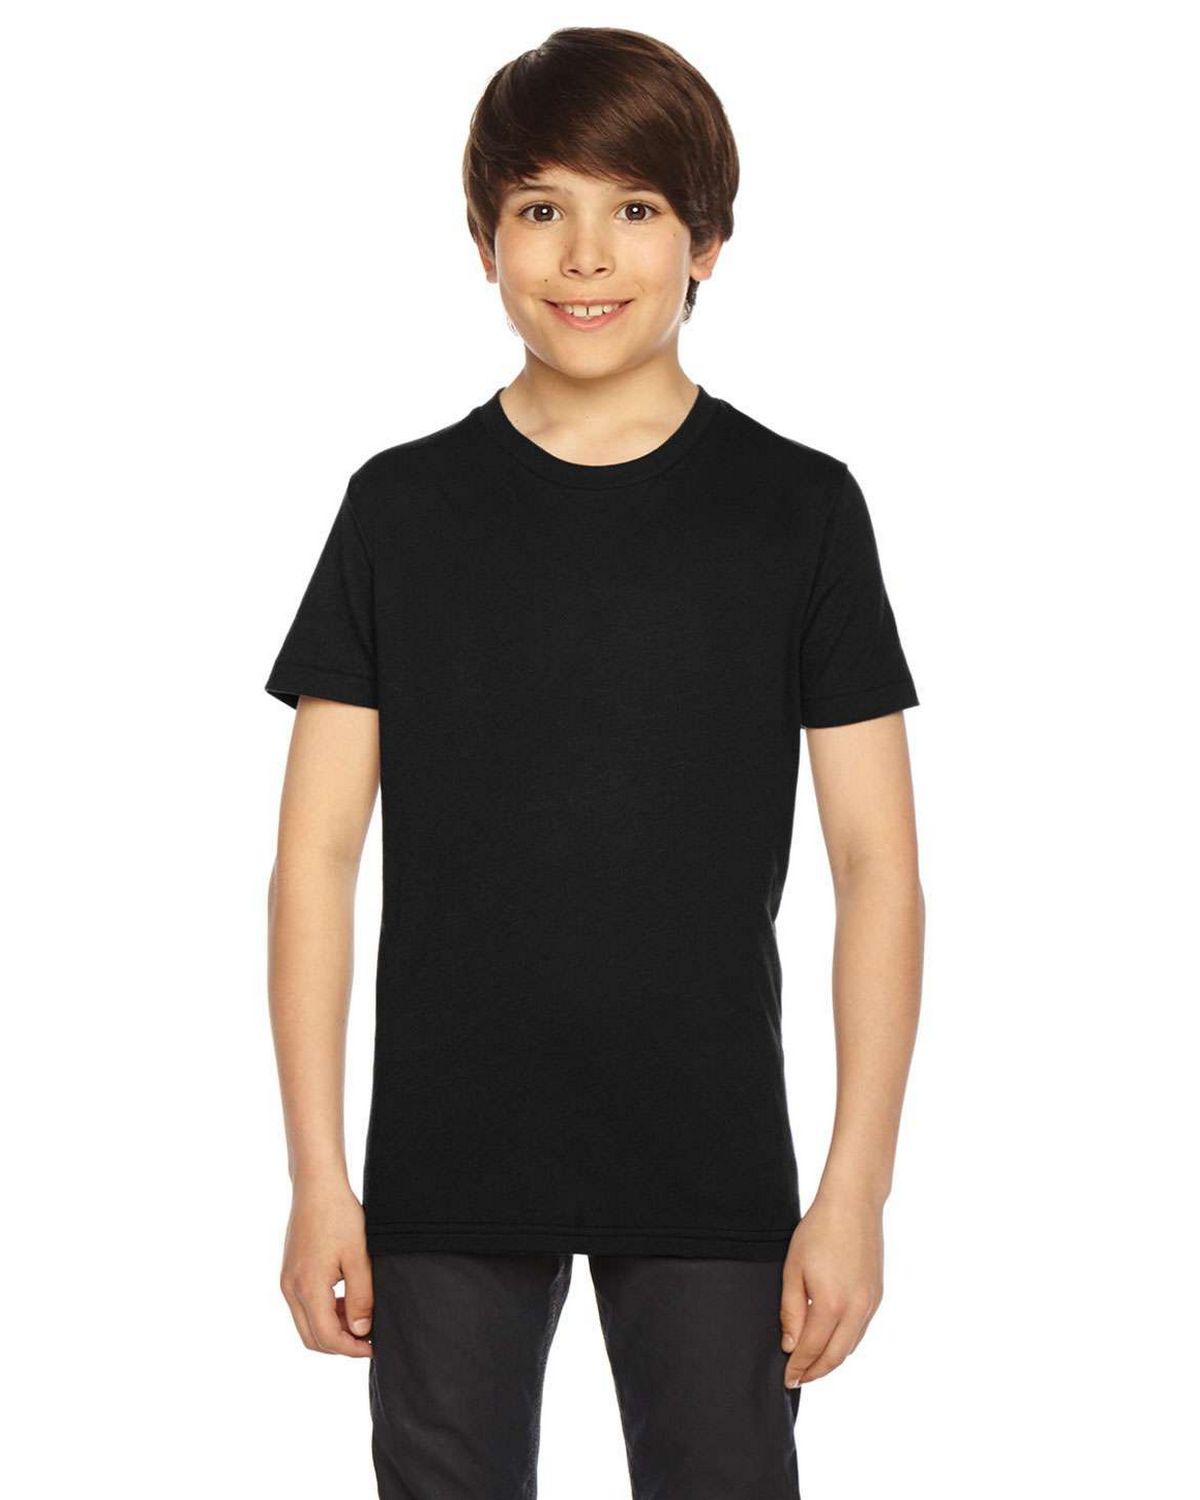 American Apparel BB201W Youth Poly-Cotton T-Shirt